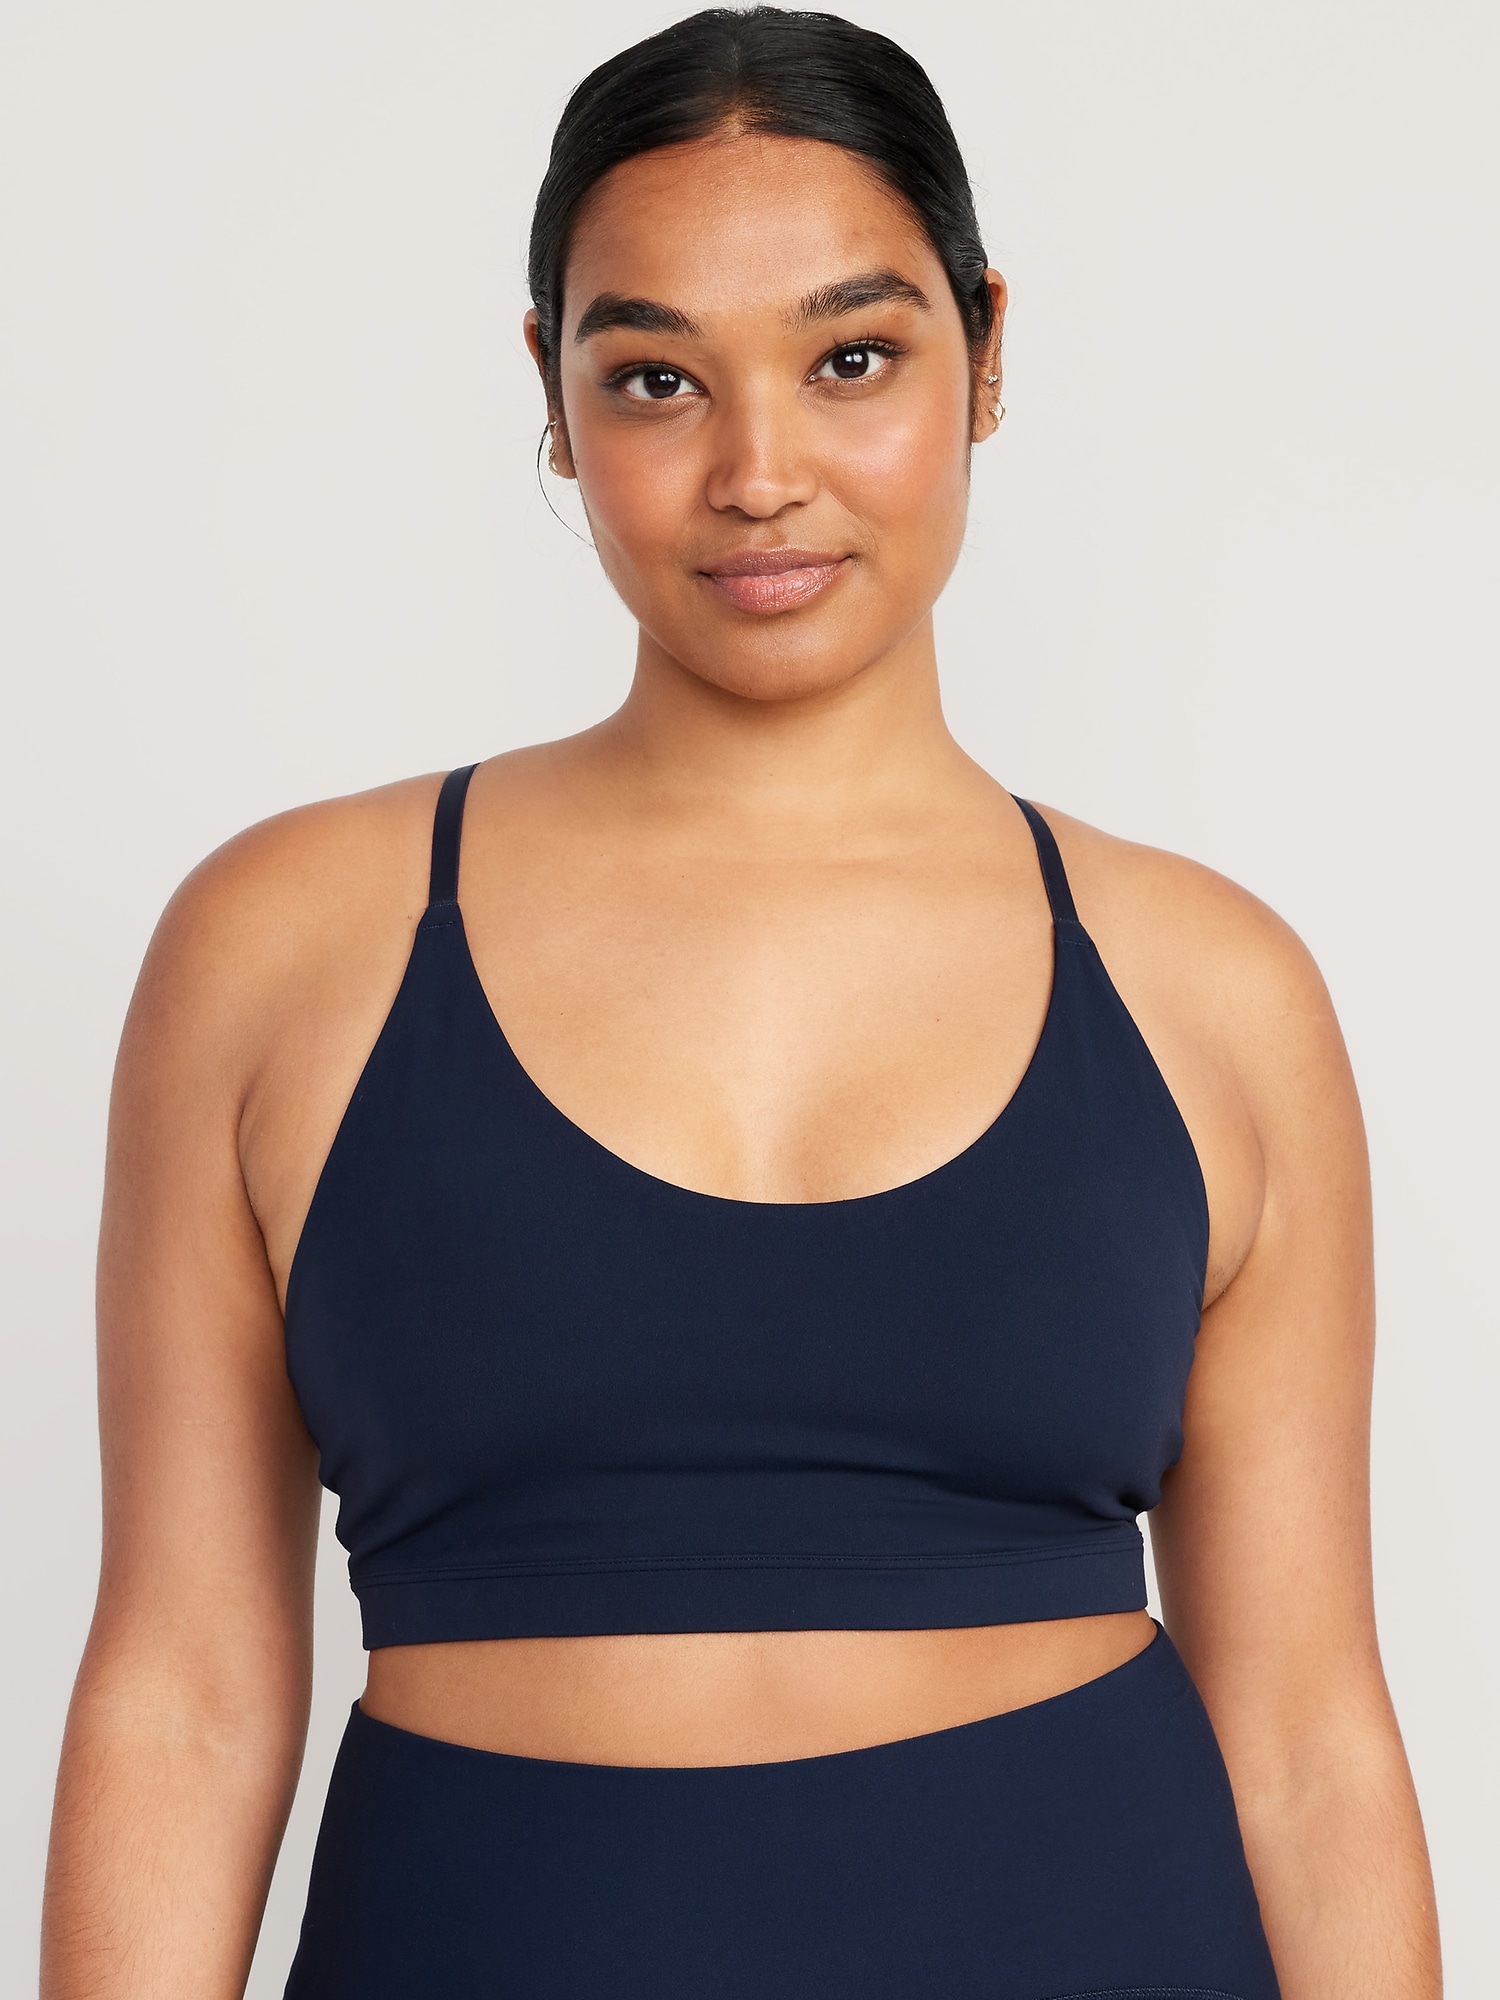 Old Navy DD Cup Active Sports Bras